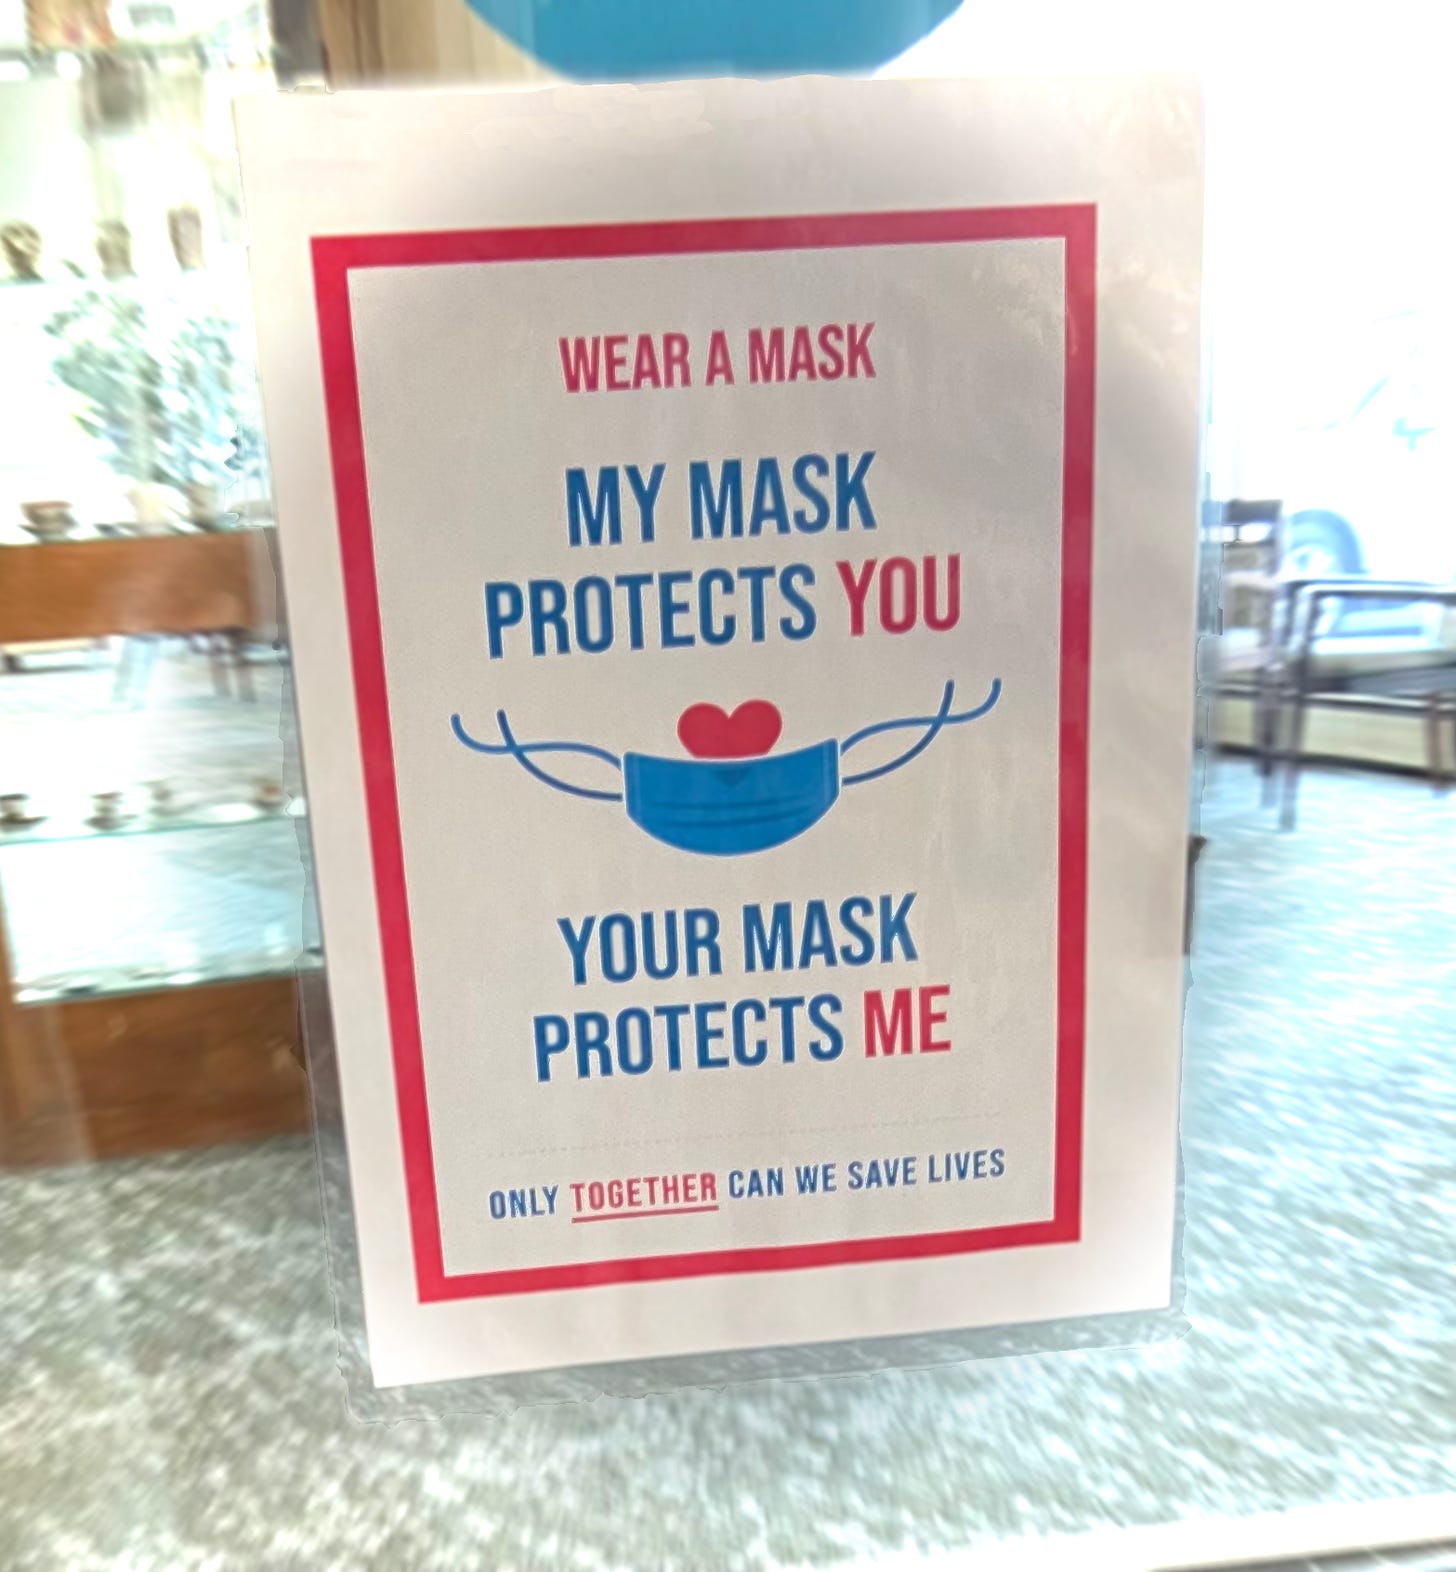 Spotted at senior housing in Palo Alto California. (The photo is of a sign posted on a glass door window, the sign shows the image of a mask with a heart peeking out from behind it, and the sign states Wear a mask. My mask protects you. Your mask protects me. Only together can we save lives.)